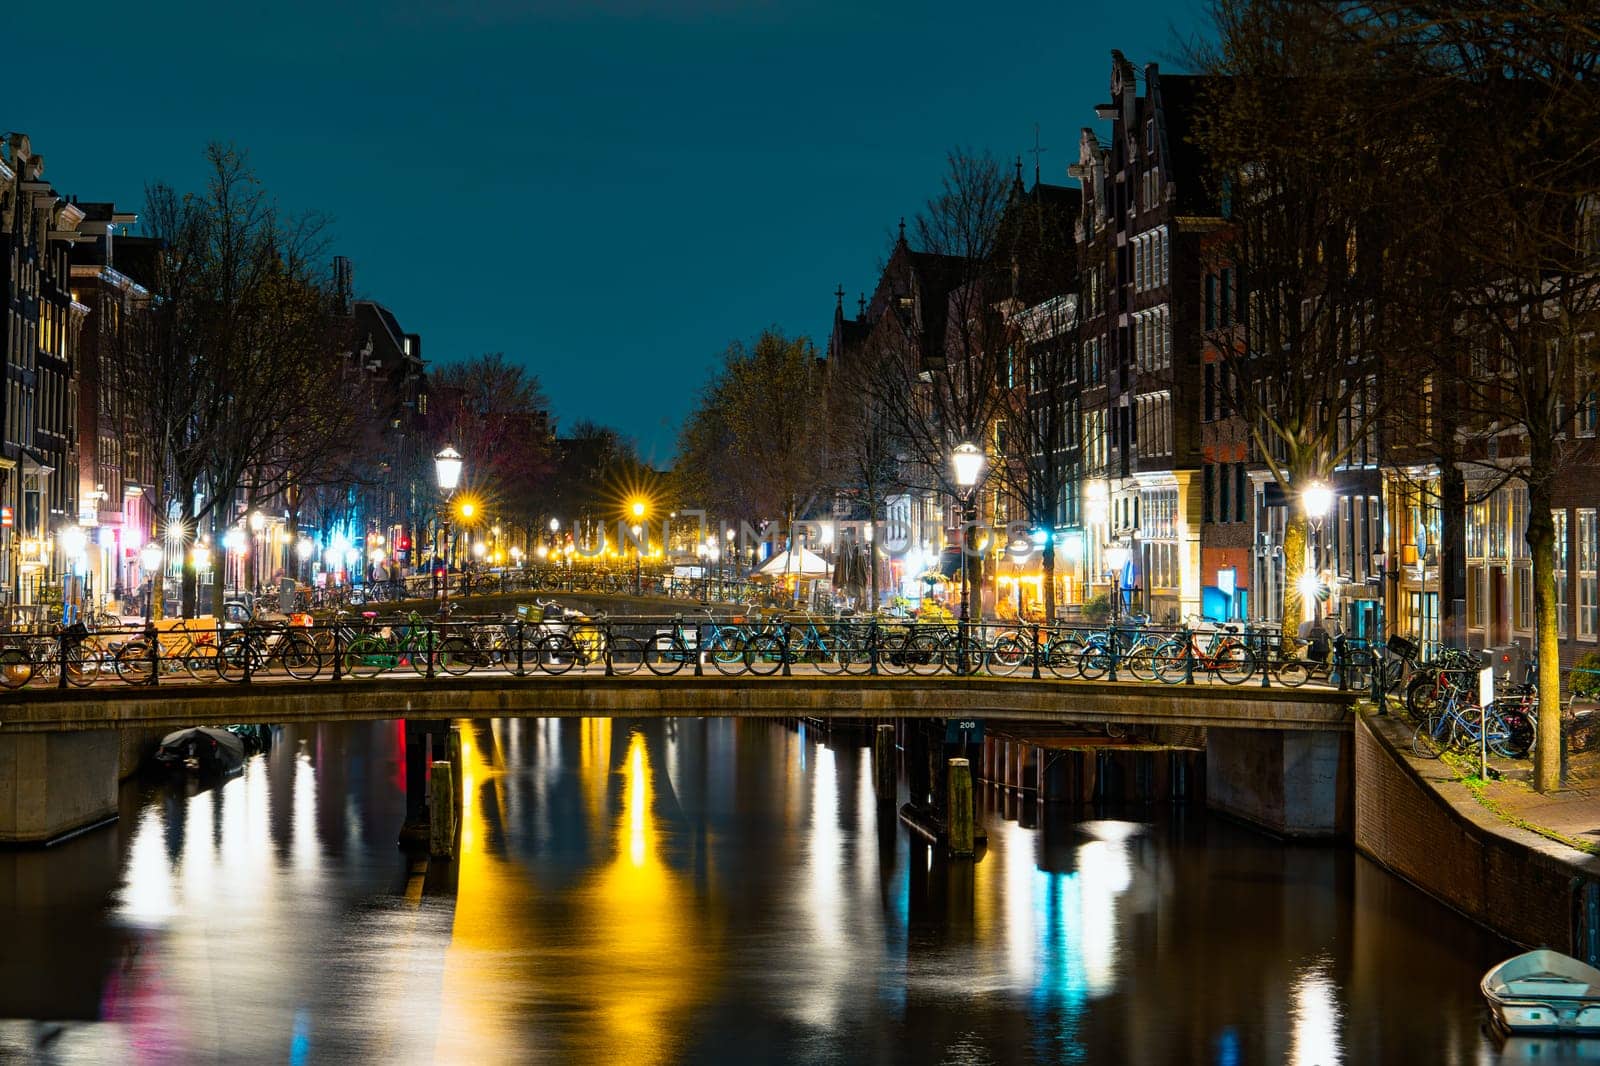 Captivating Night in Amsterdam: A Mesmerizing Long Exposure Photo of Amsterdam's Nighttime Canals by PhotoTime